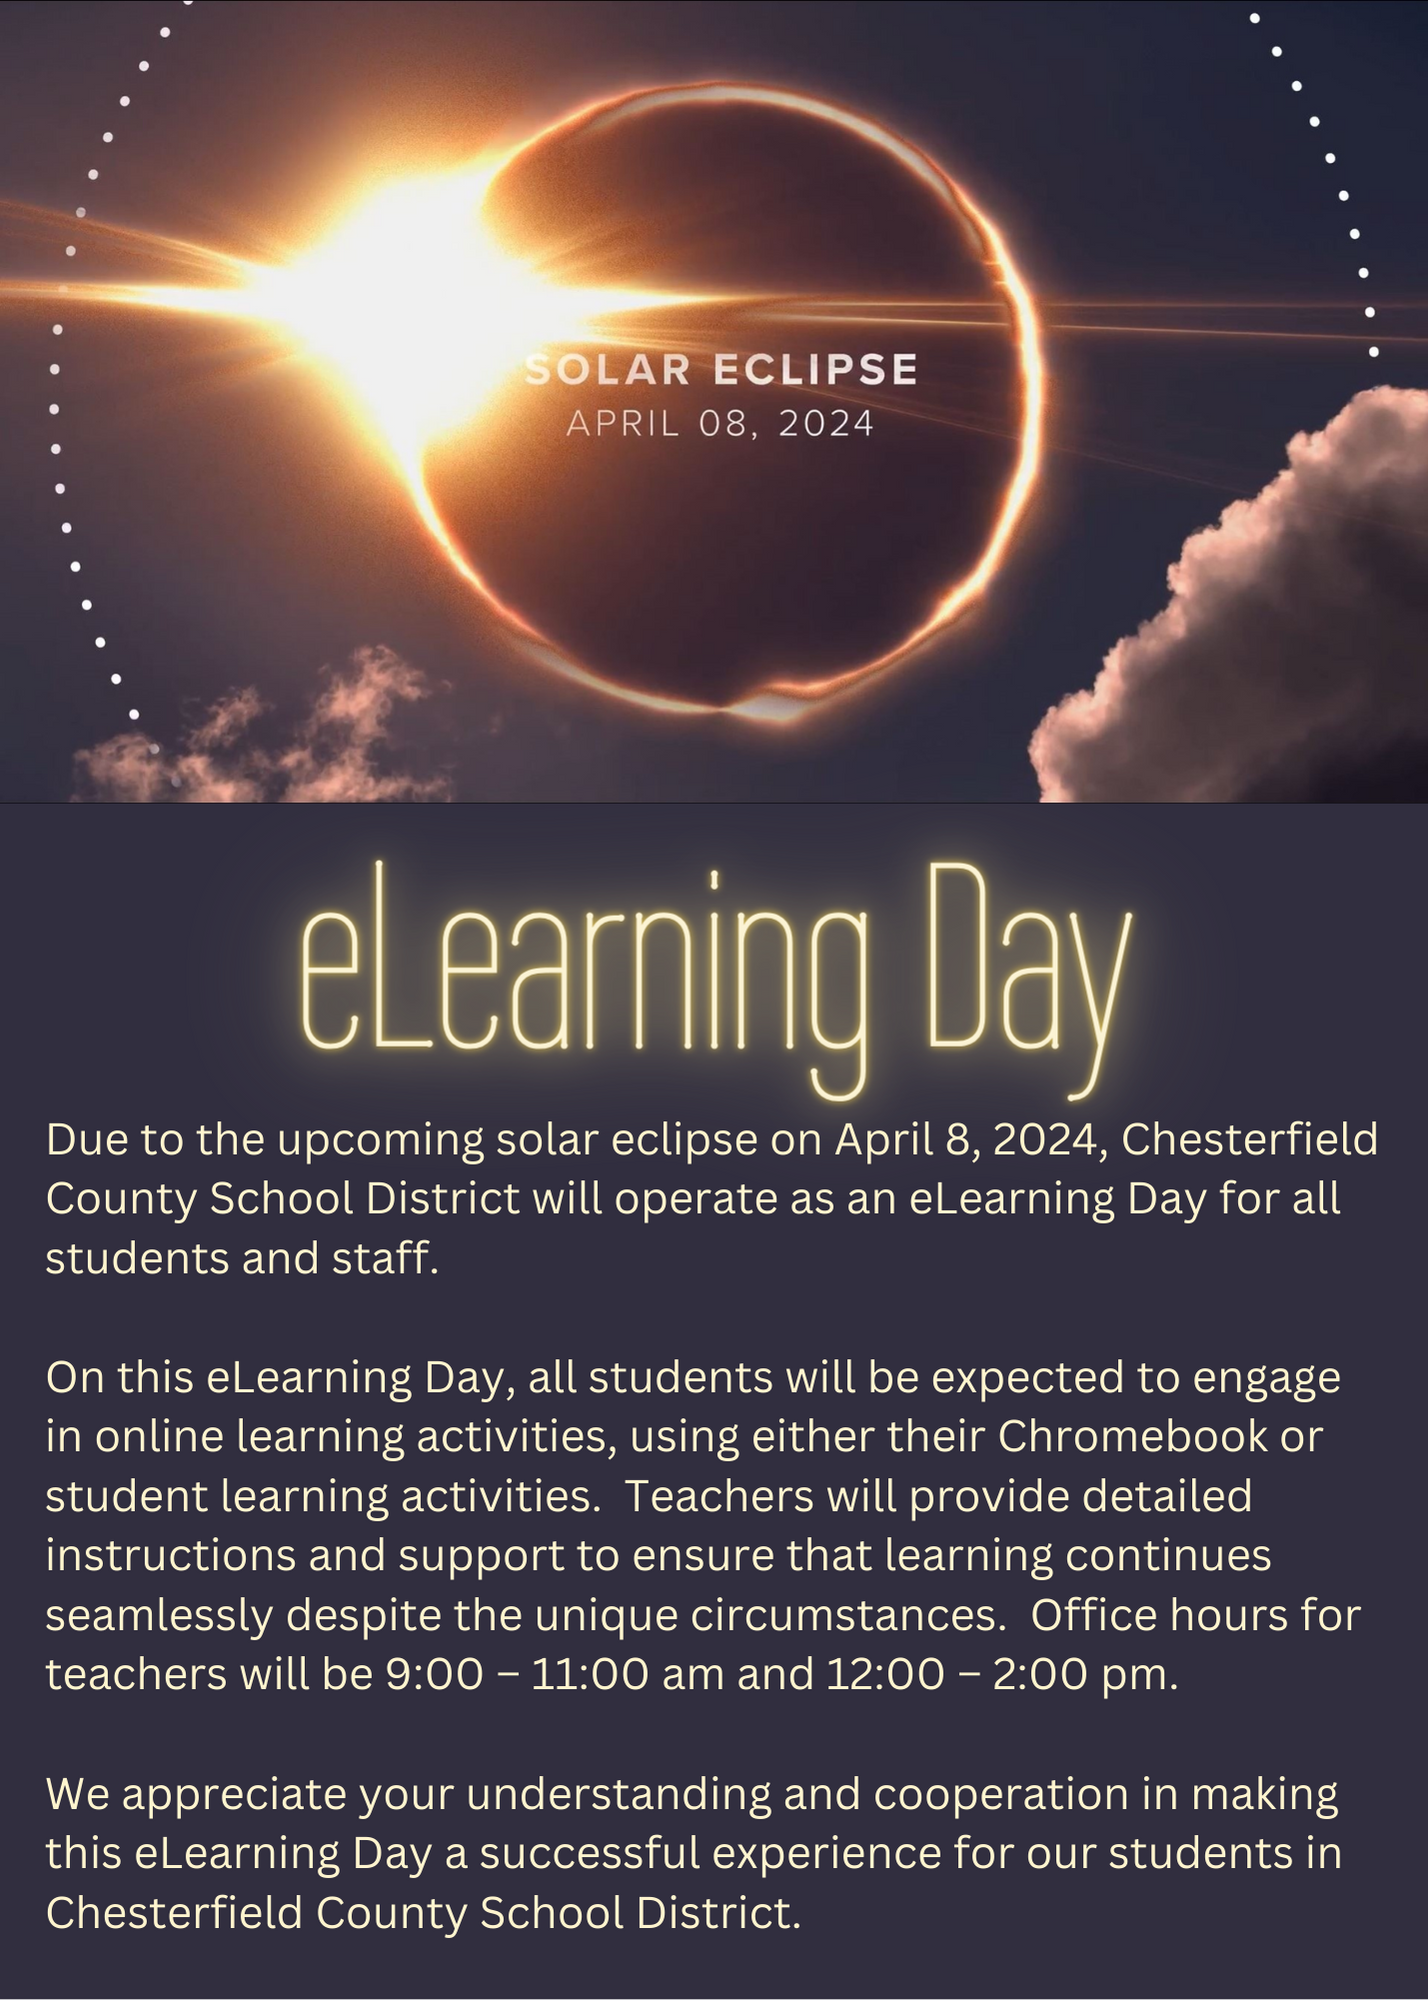 Due to the upcoming solar eclipse on April 8, 2024, Chesterfield County School District will operate as an eLearning Day for all students and staff. On this eLearning Day, all students will be expected to engage in online learning activities, using either their Chromebook or student learning activities.  Teachers will provide detailed instructions and support to ensure that learning continues seamlessly despite the unique circumstances.  Office hours for teachers will be 9:00 – 11:00 am and 12:00 – 2:00 pm.  We appreciate your understanding and cooperation in making this eLearning Day a successful experience for our students in Chesterfield County School District.